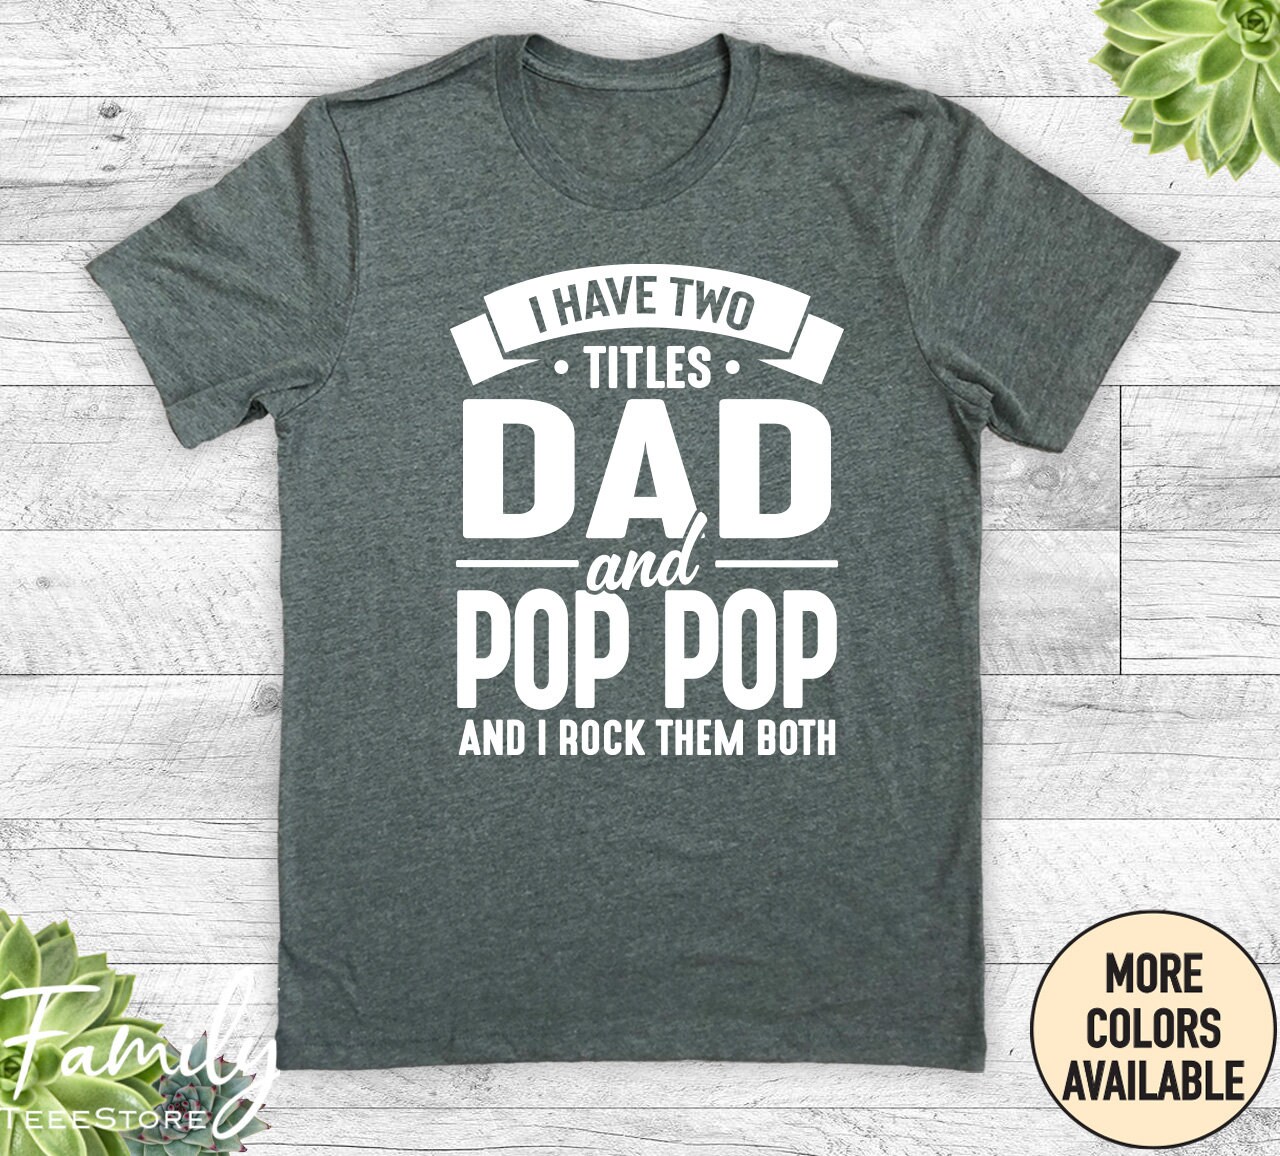 I Have Two Titles Dad and Pop Pop and I Rock Them Both Unisex Shirt Pop Pop  Shirt Pop Pop Gift New Pop Pop Gift 